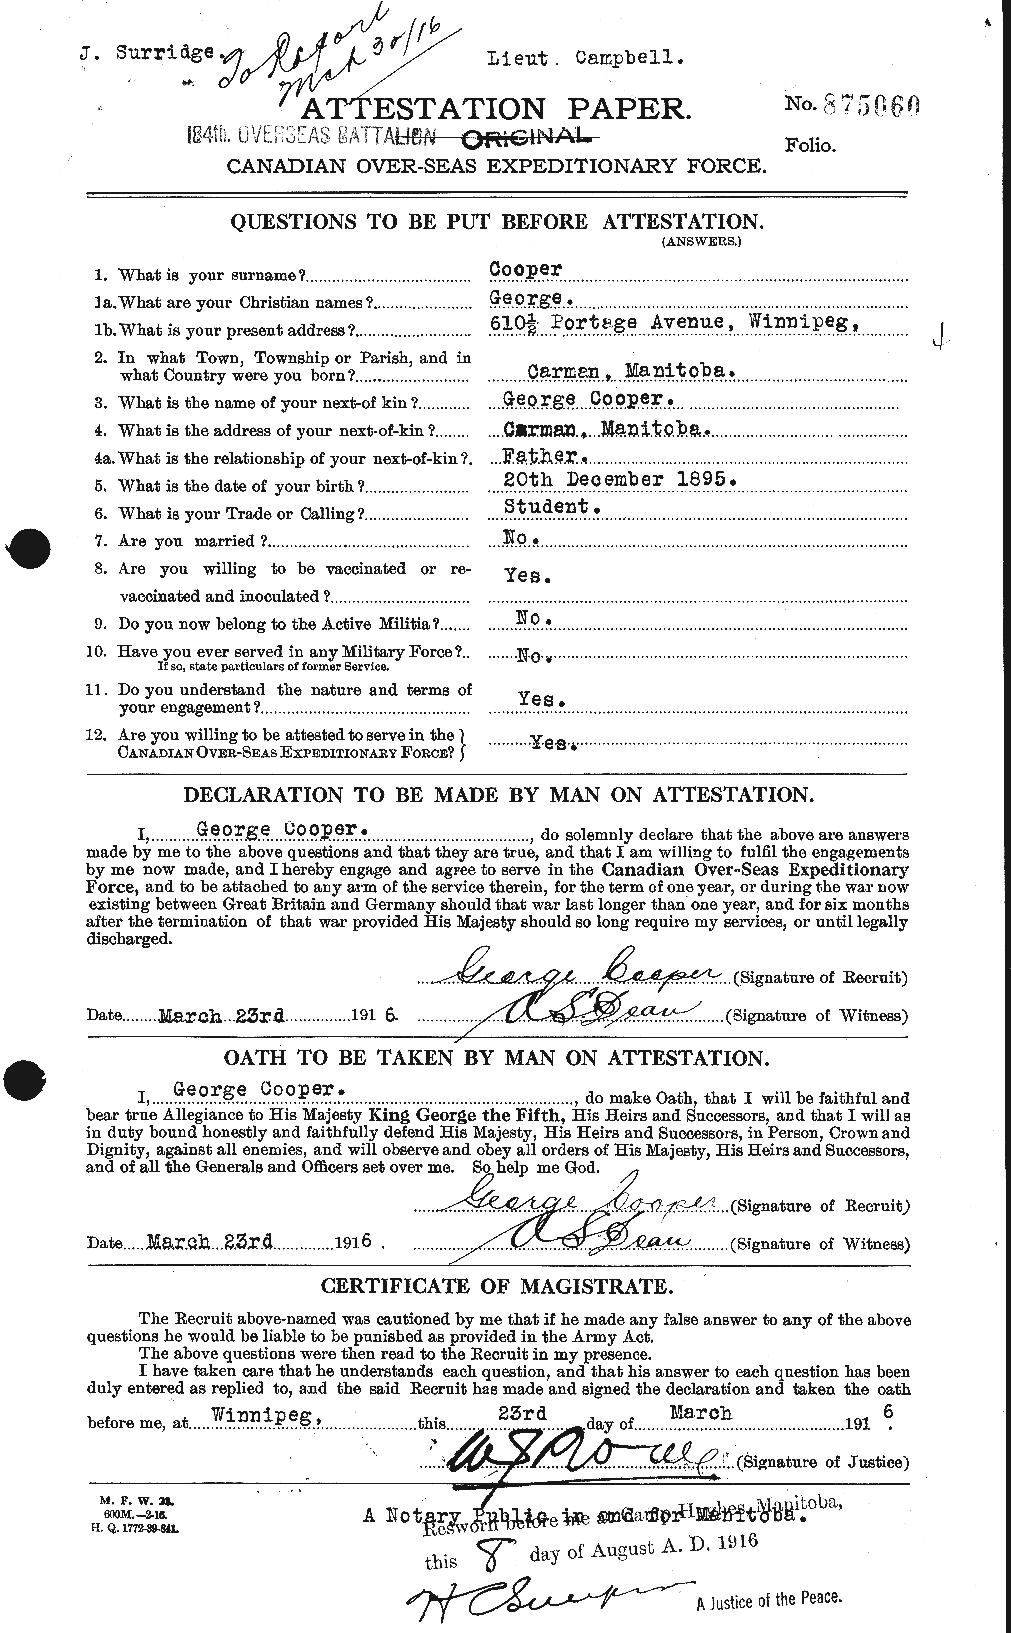 Personnel Records of the First World War - CEF 057805a